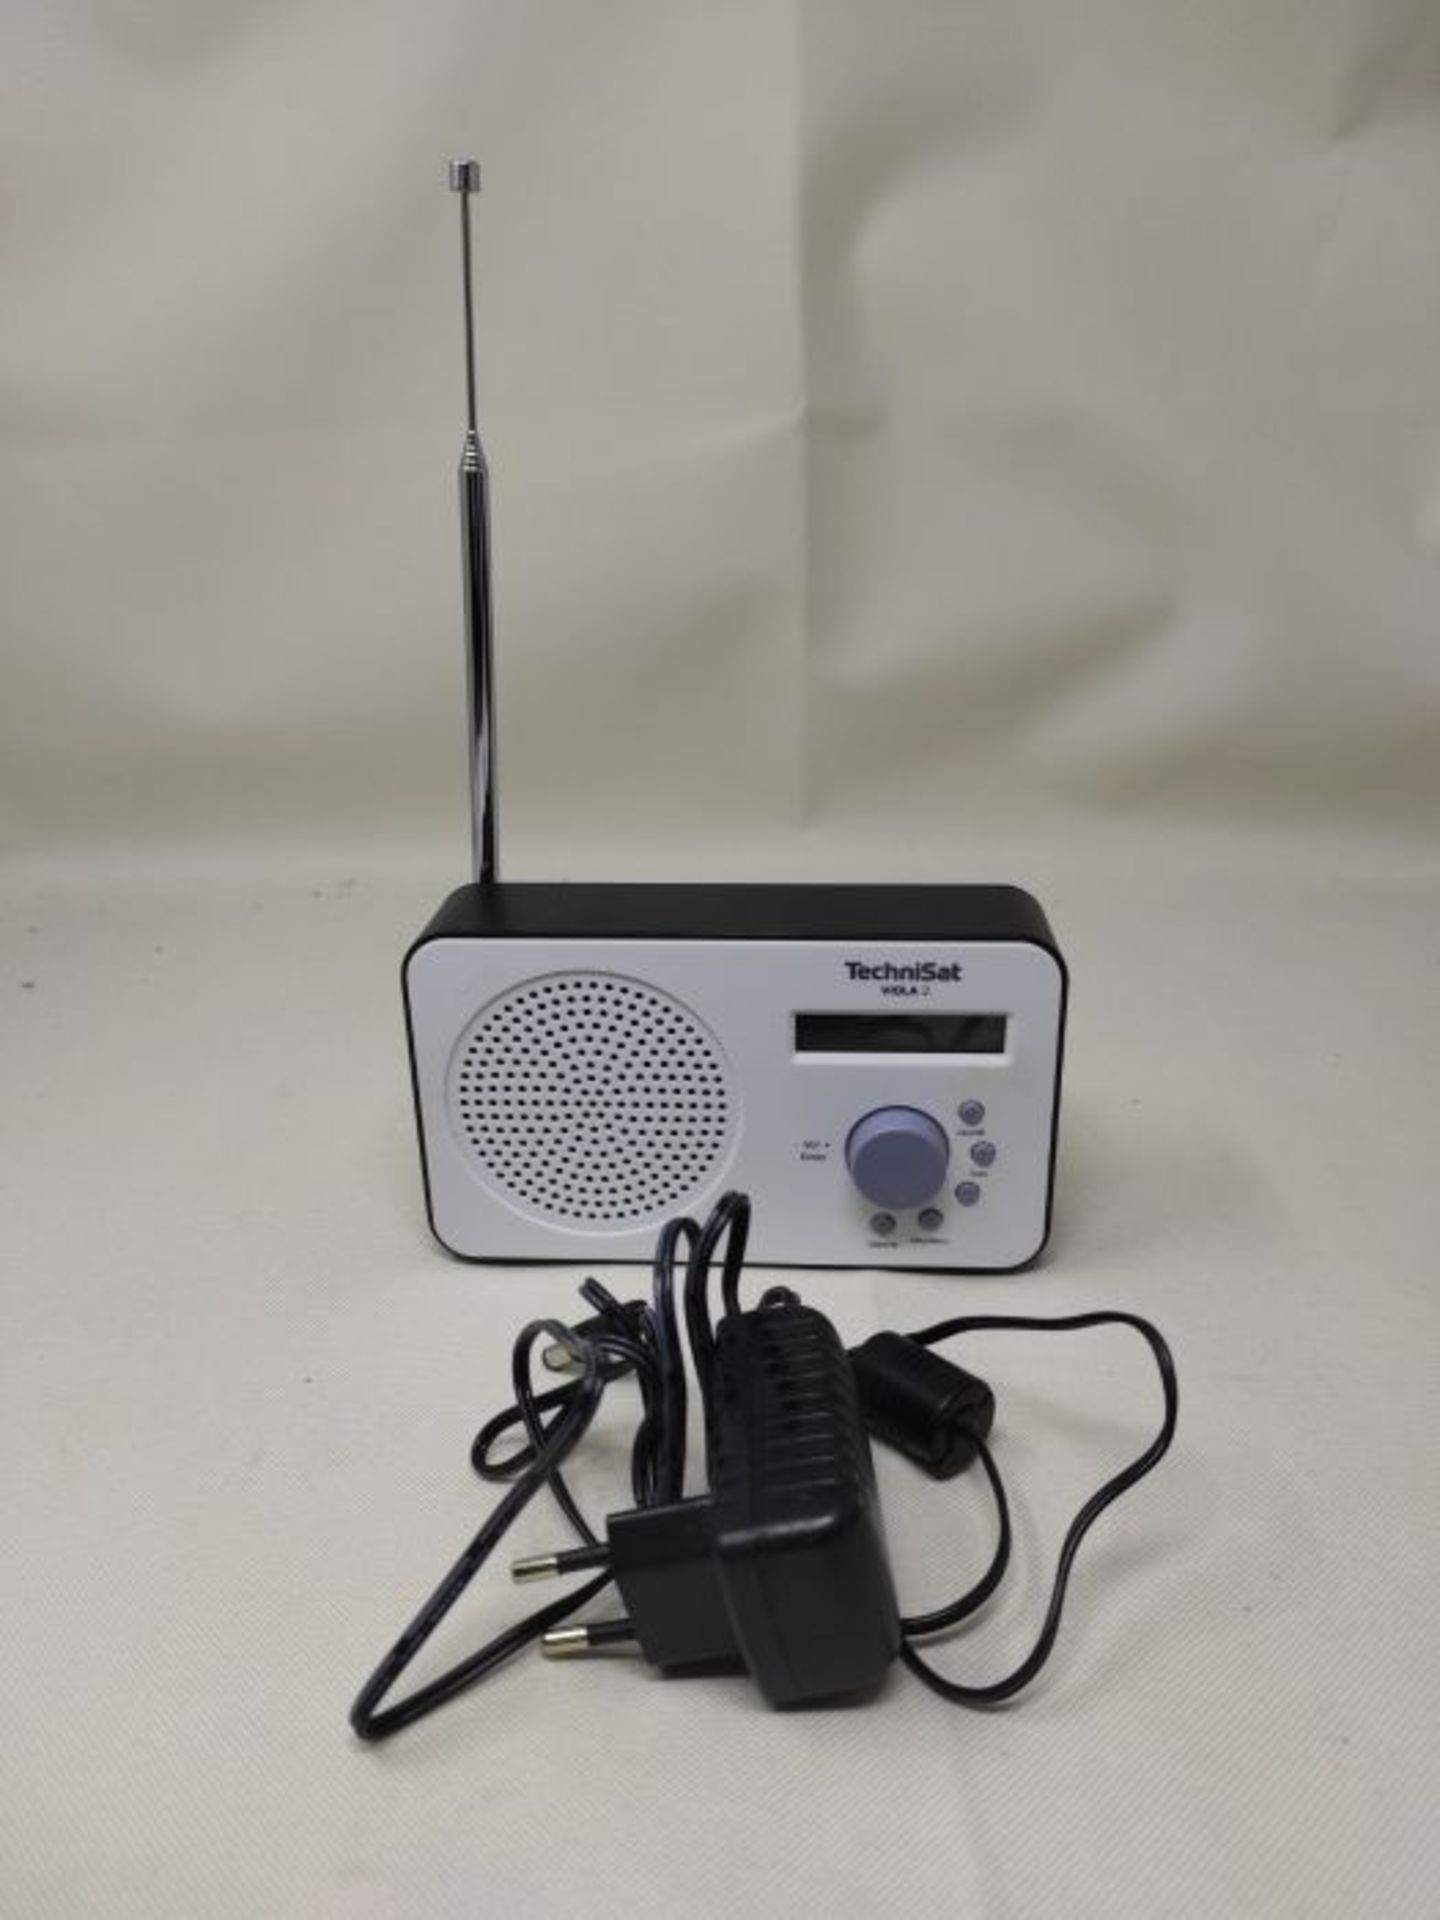 Technisat Viola 2 Digital Radio (Small, Portable Charger) with Speakers, FM, DAB , Z - Image 3 of 3